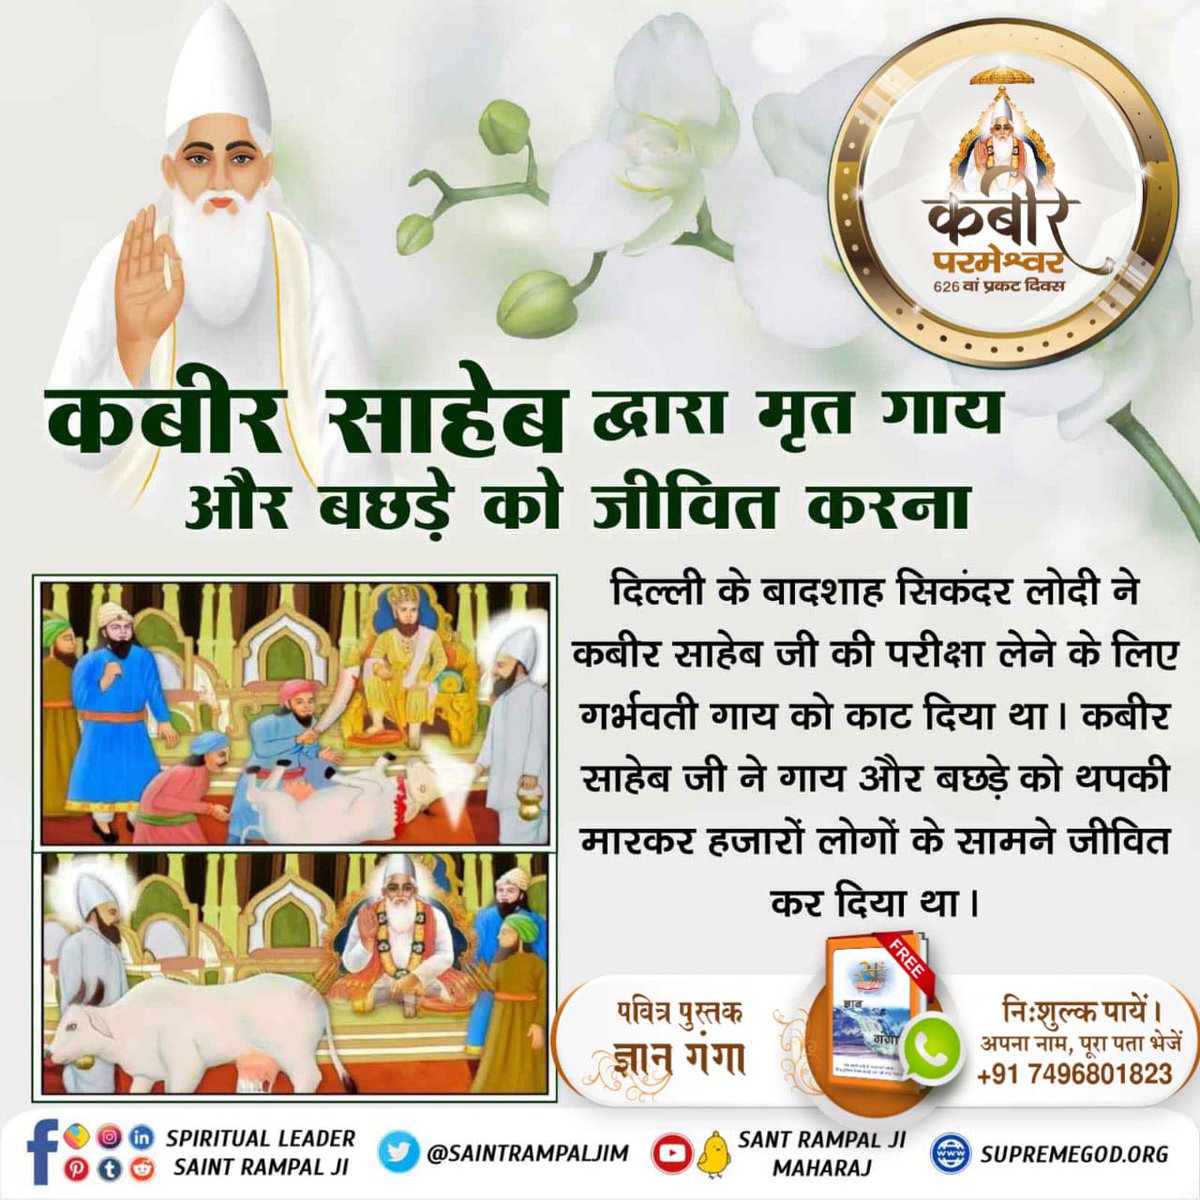 #Unbelievable_Miracles_Of_God
Lord Kabir resurrected the cow and its calf that had died.

God Kabir Prakat Diwas